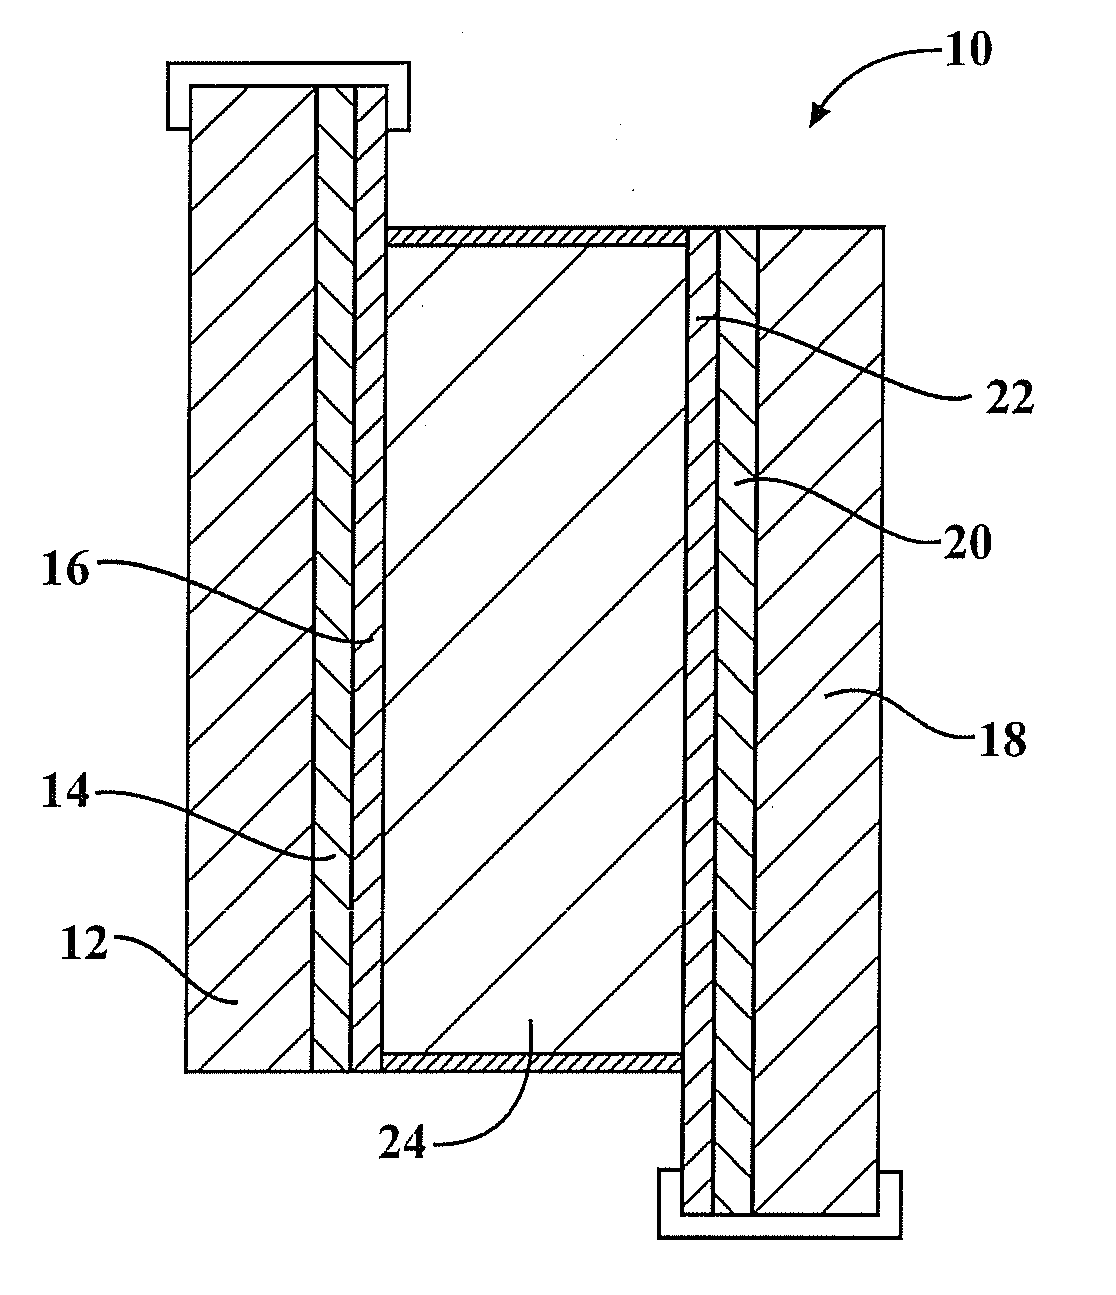 Polymer electrolytes and devices containing them